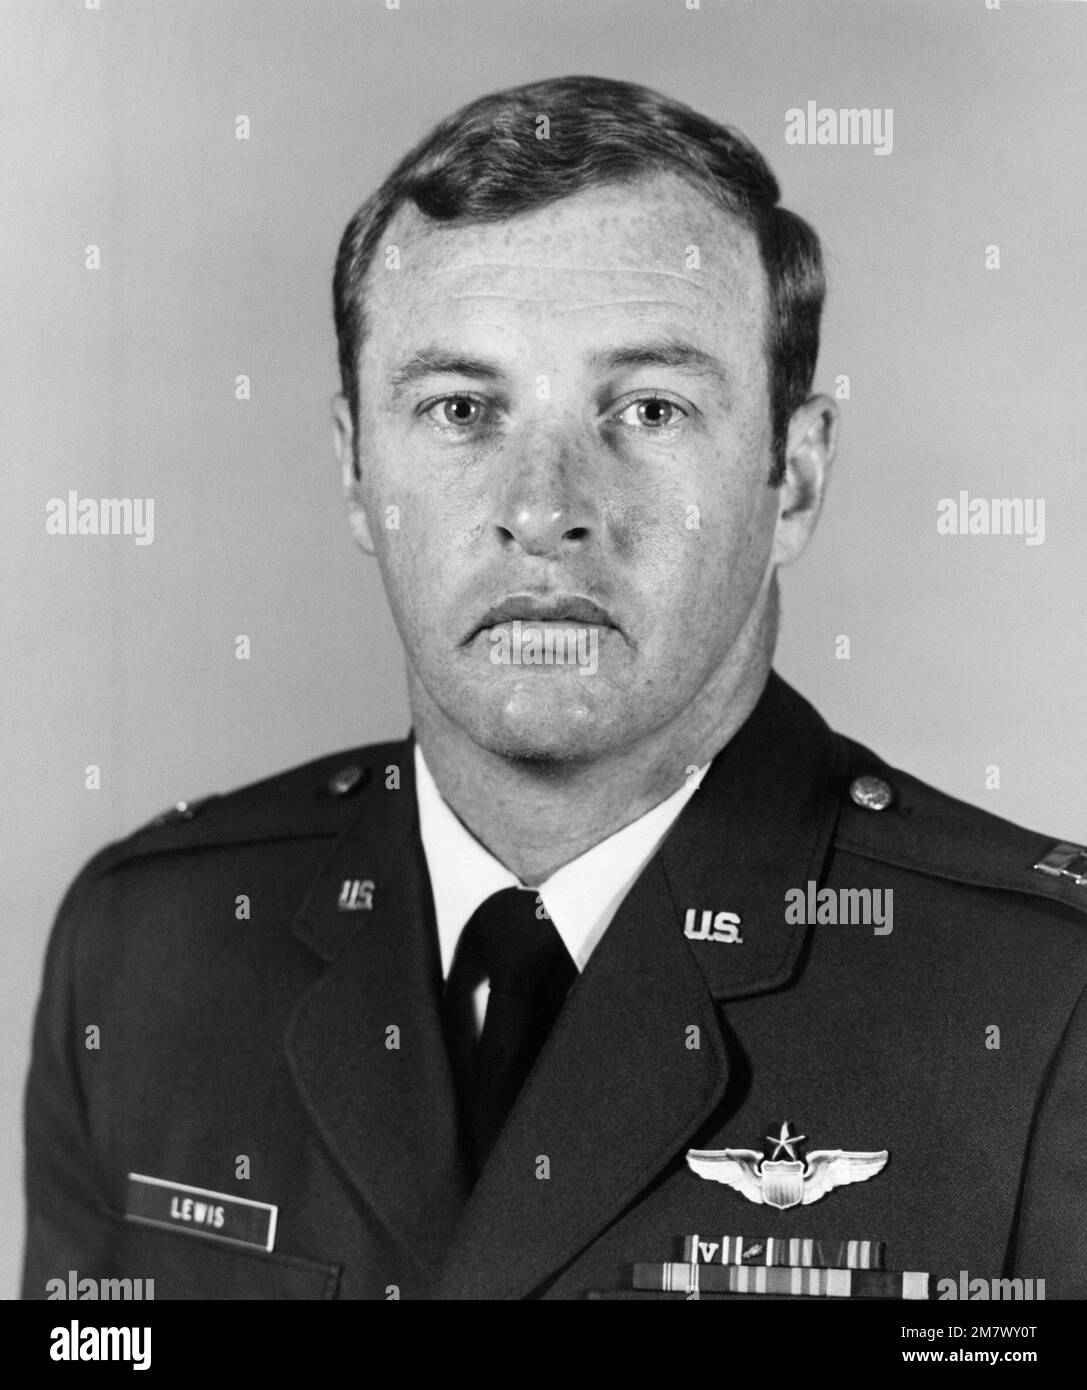 Portrait of Captain Harold Lawton Lewis Jr., United States Air Force, killed in the attempt to rescue the US hostages from Iran. Country: Unknown Stock Photo